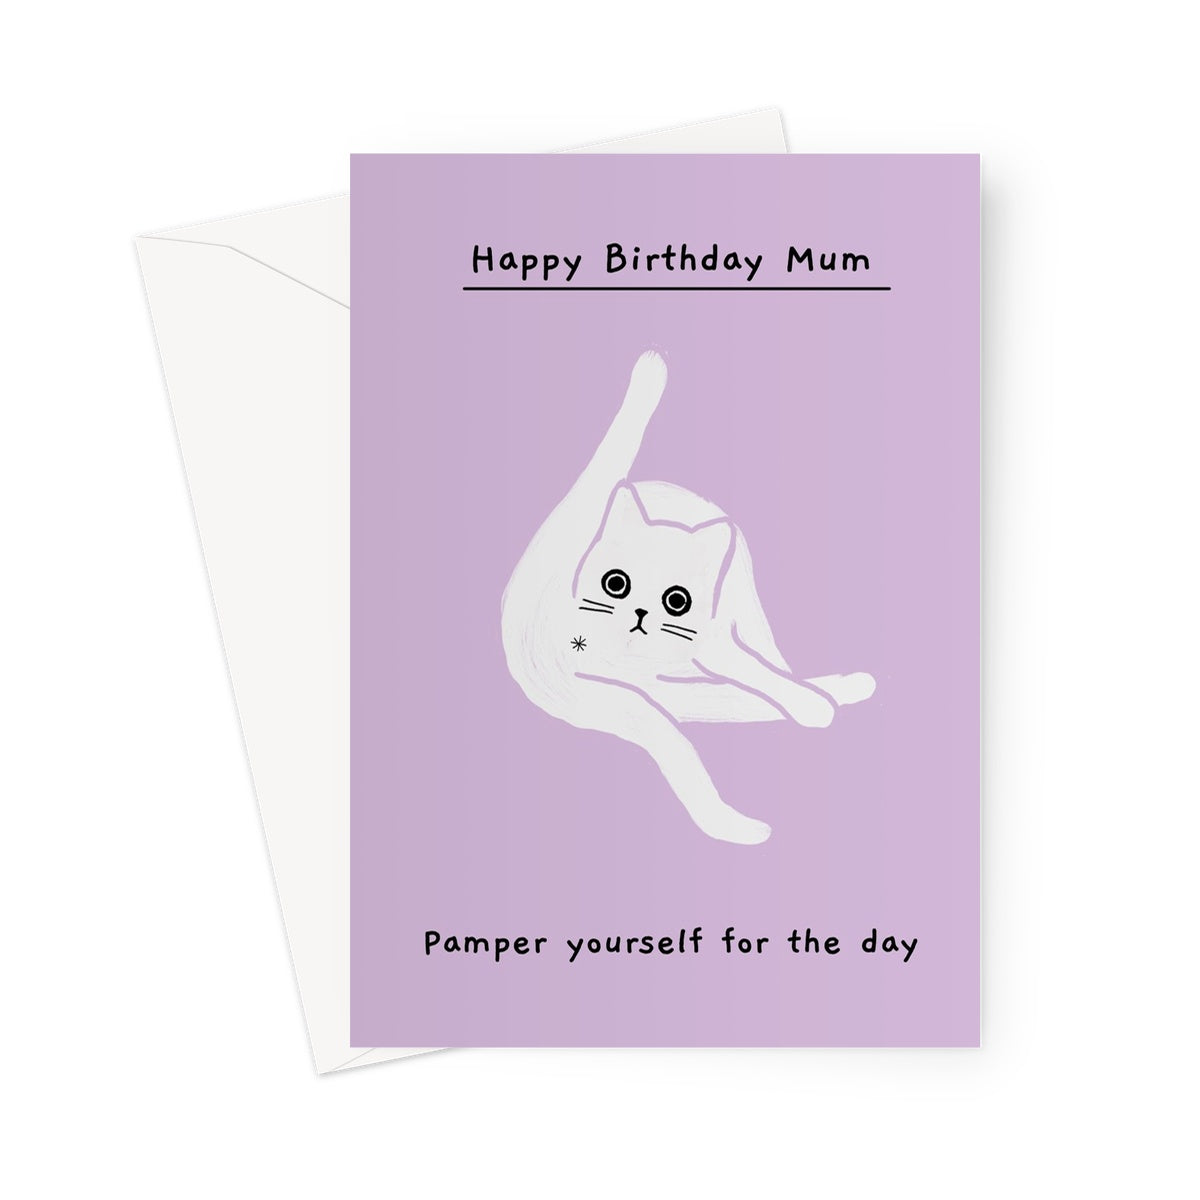 Ken the cat funny birthday card for Mum in purple - pamper yourself